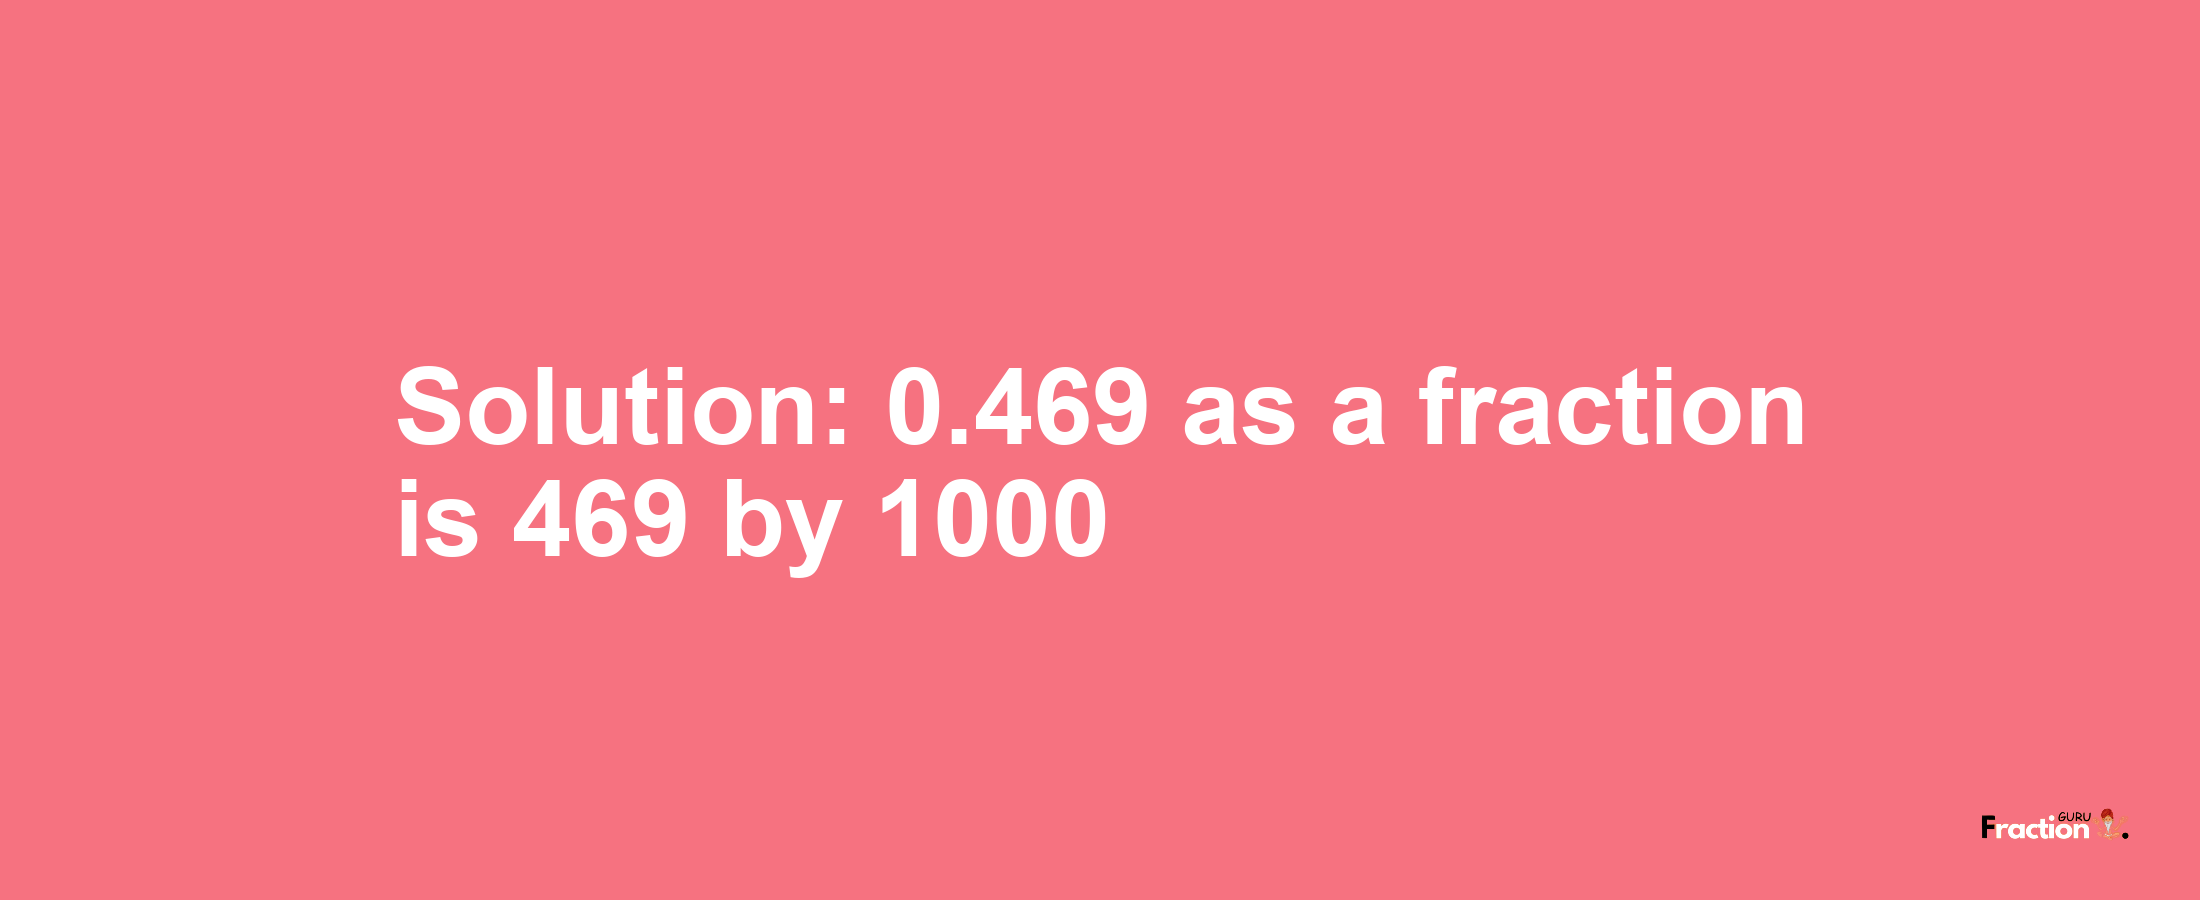 Solution:0.469 as a fraction is 469/1000